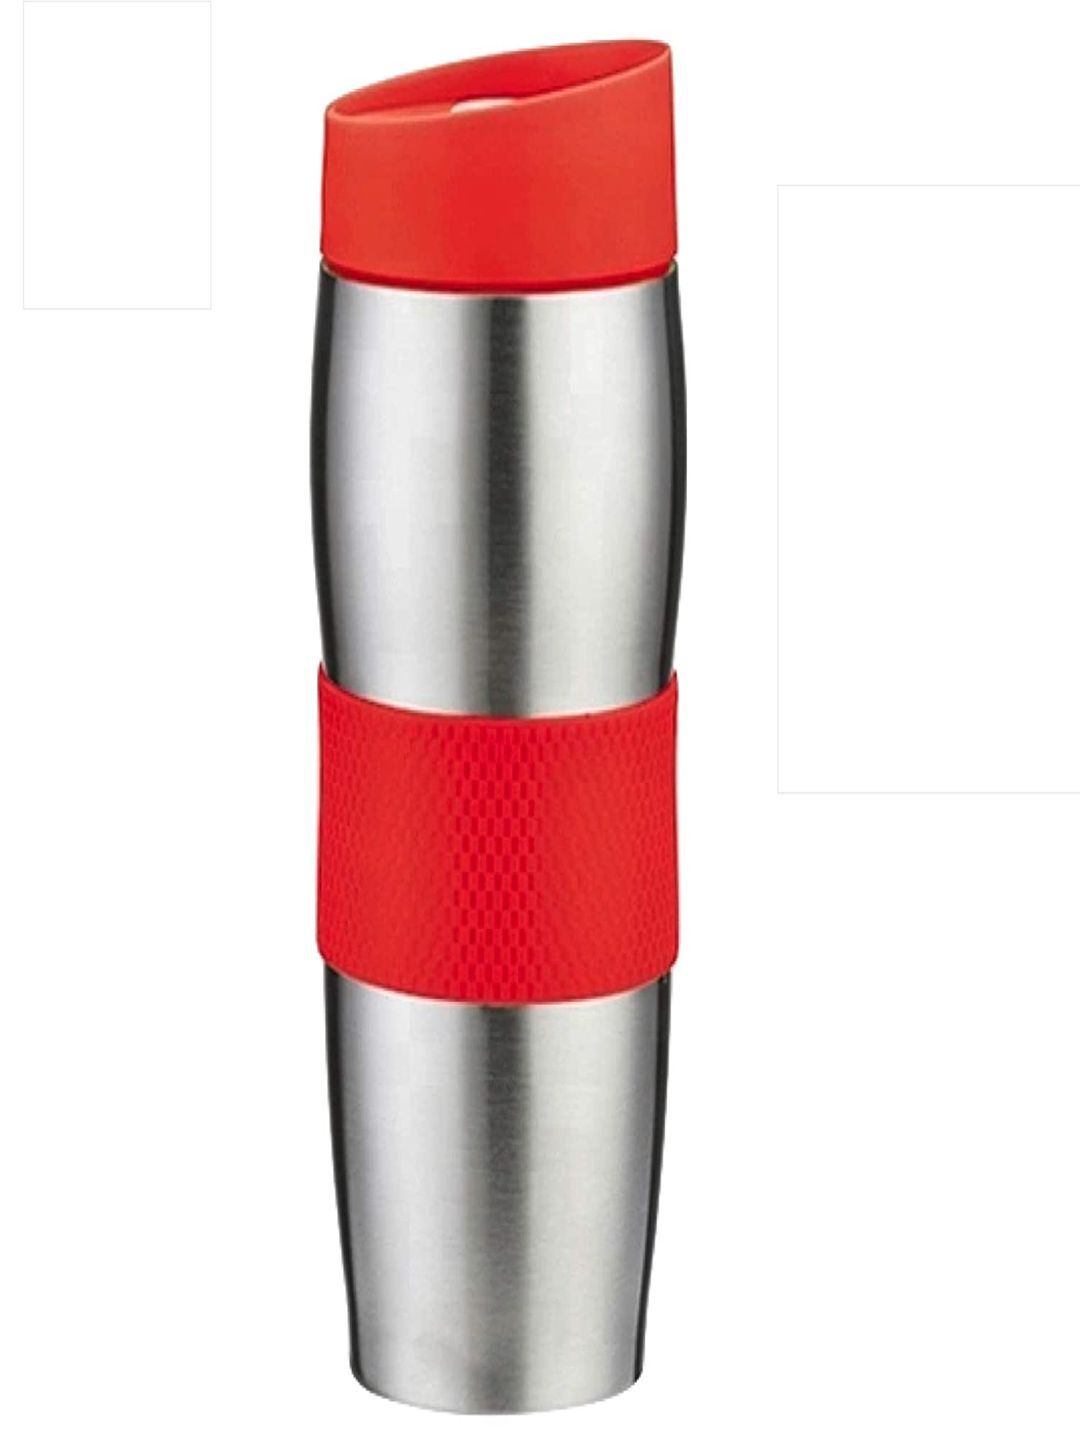 Frabble8 Red & Silver-Toned Vacuum Insulated Travel Stainless Steel Flask Mug 380 ml Price in India